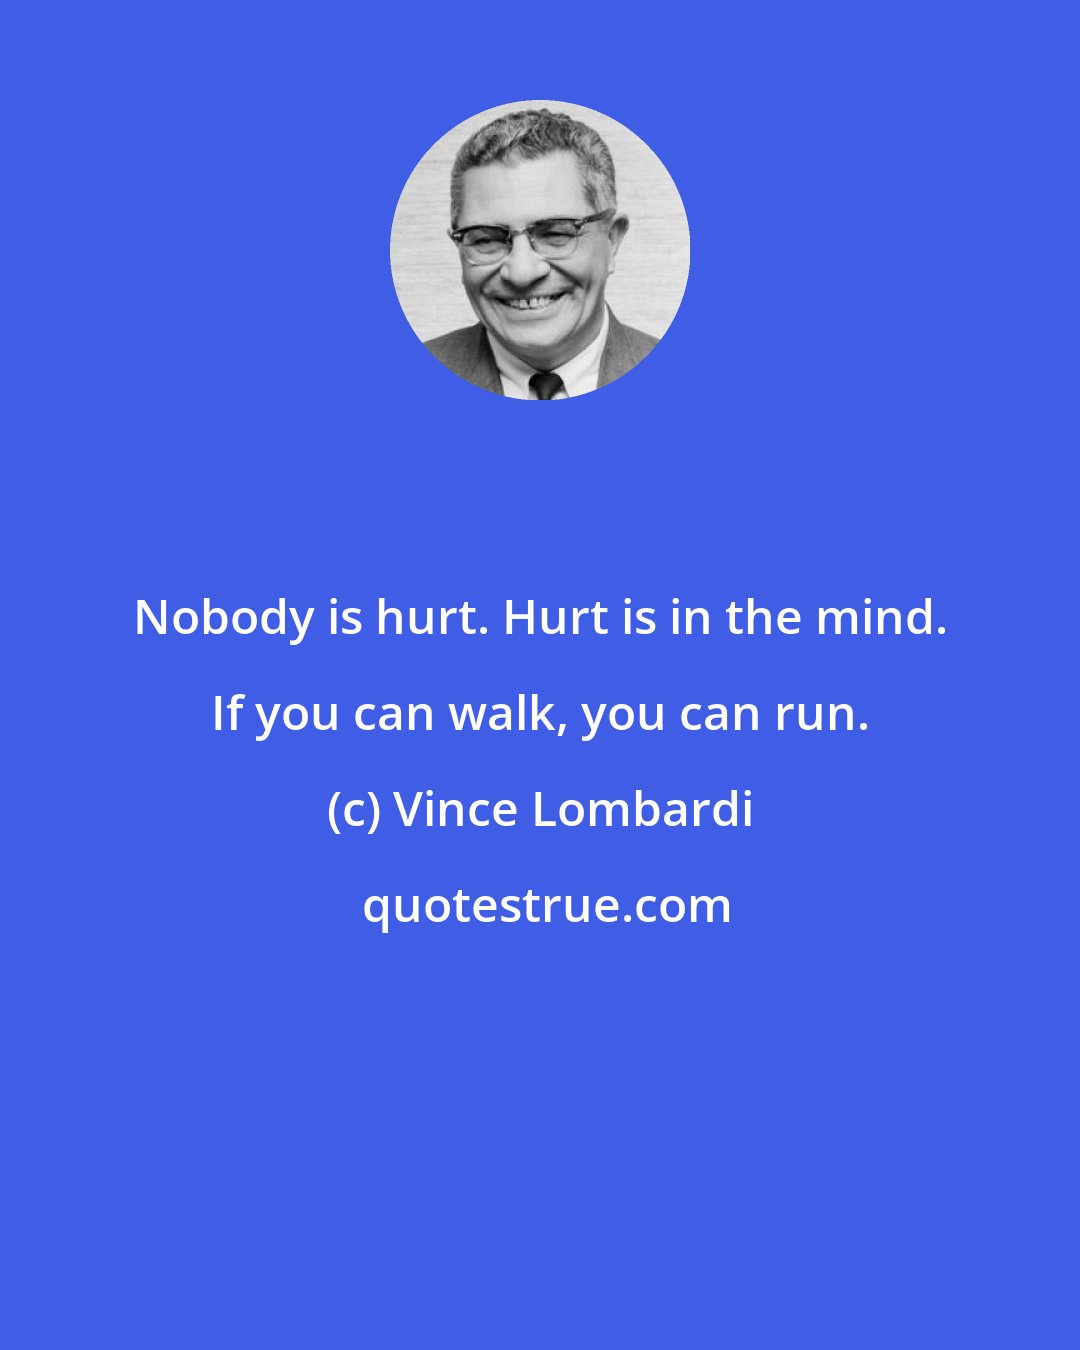 Vince Lombardi: Nobody is hurt. Hurt is in the mind. If you can walk, you can run.